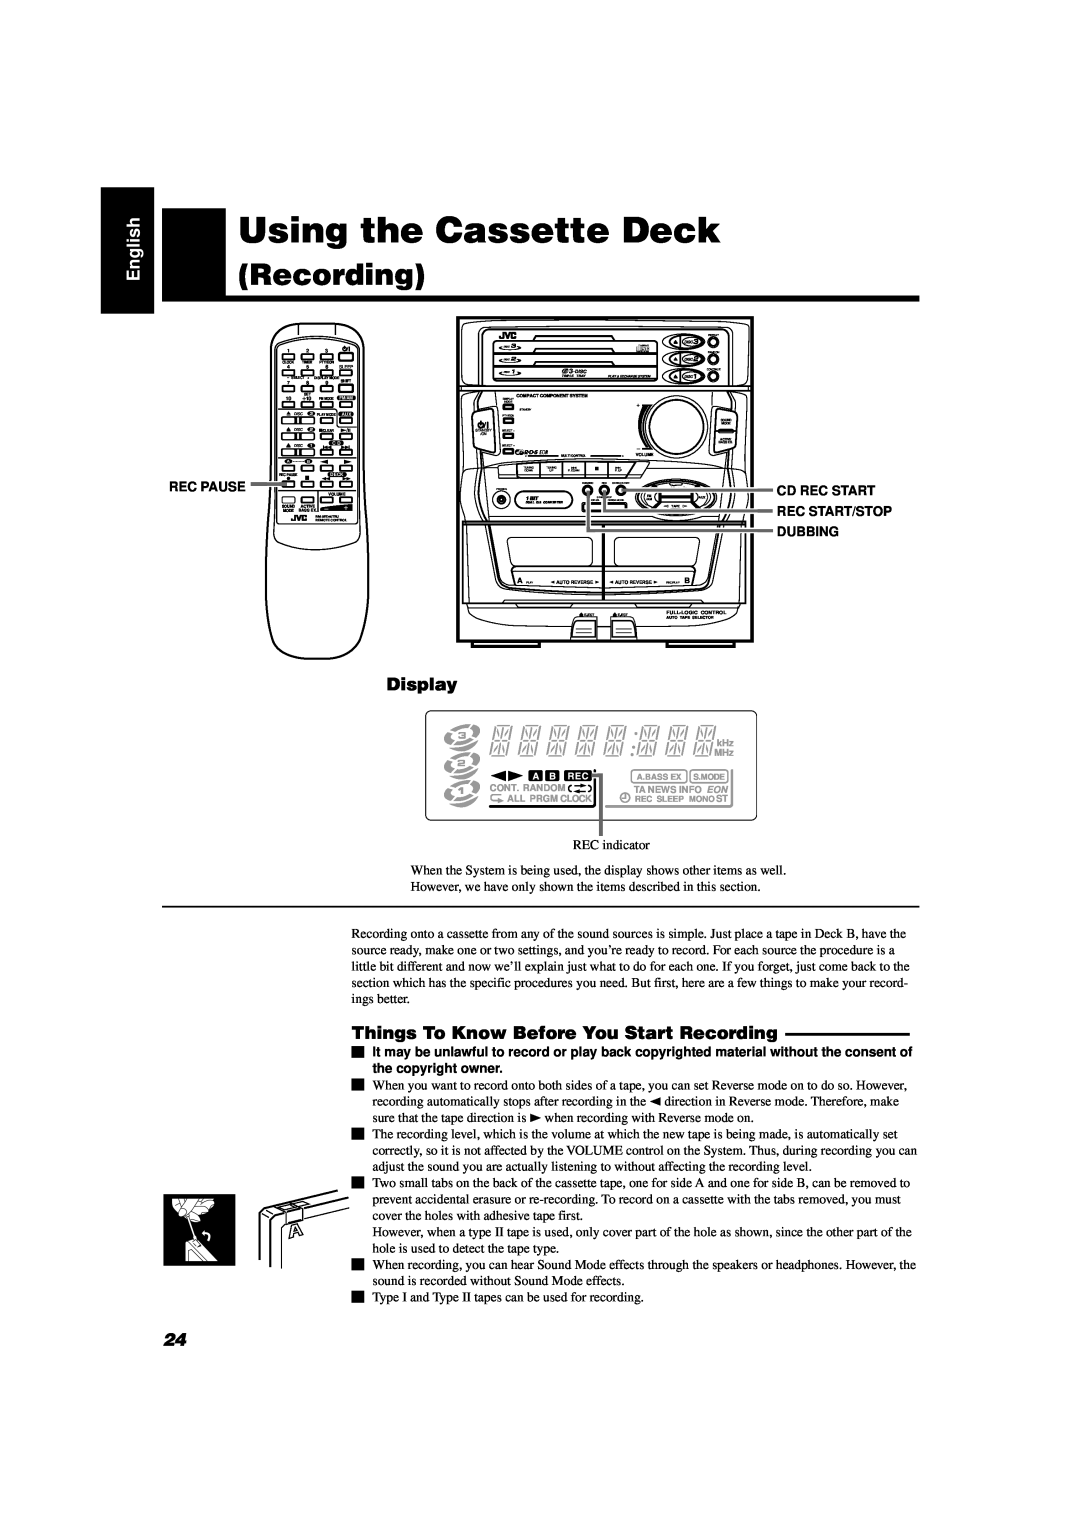 JVC CA-D351TR manual Things To Know Before You Start Recording, Using the Cassette Deck, English, Display, Rec Pause 